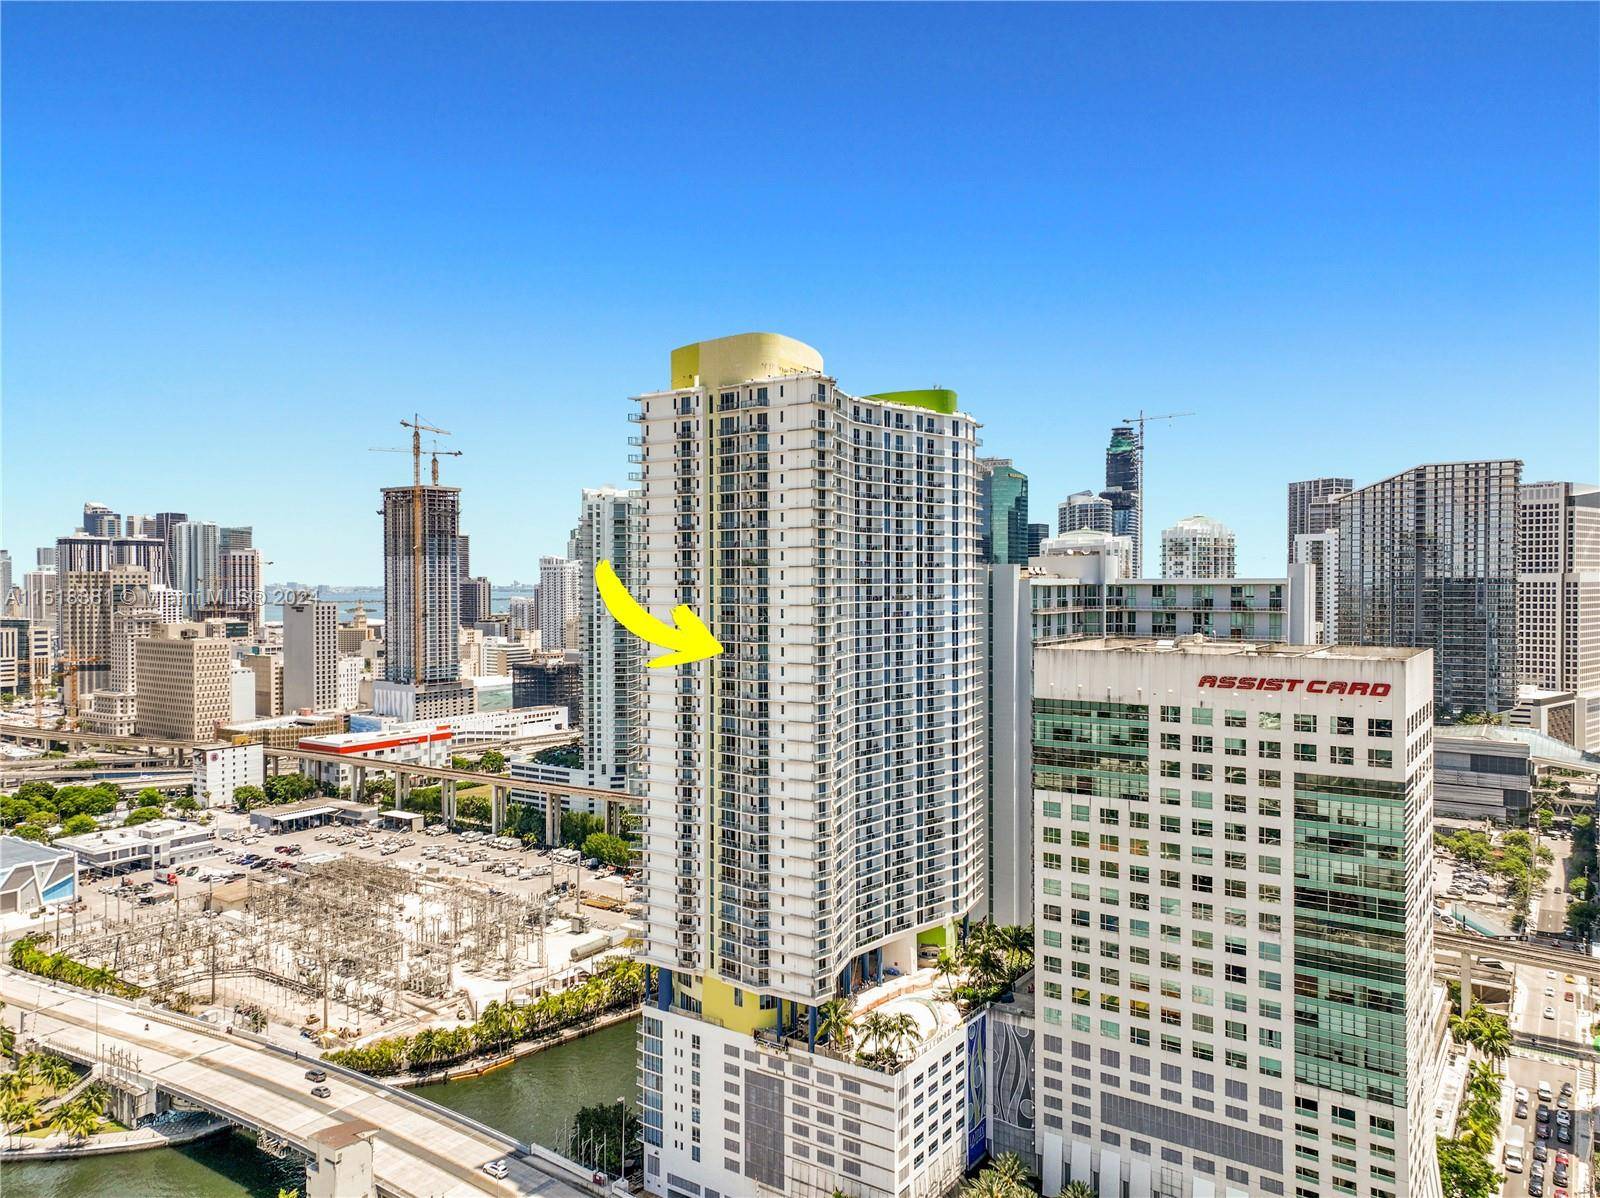 Don't miss out on the chance to live in a beautiful condo with stunning Sunset City views overlooking the Miami River.